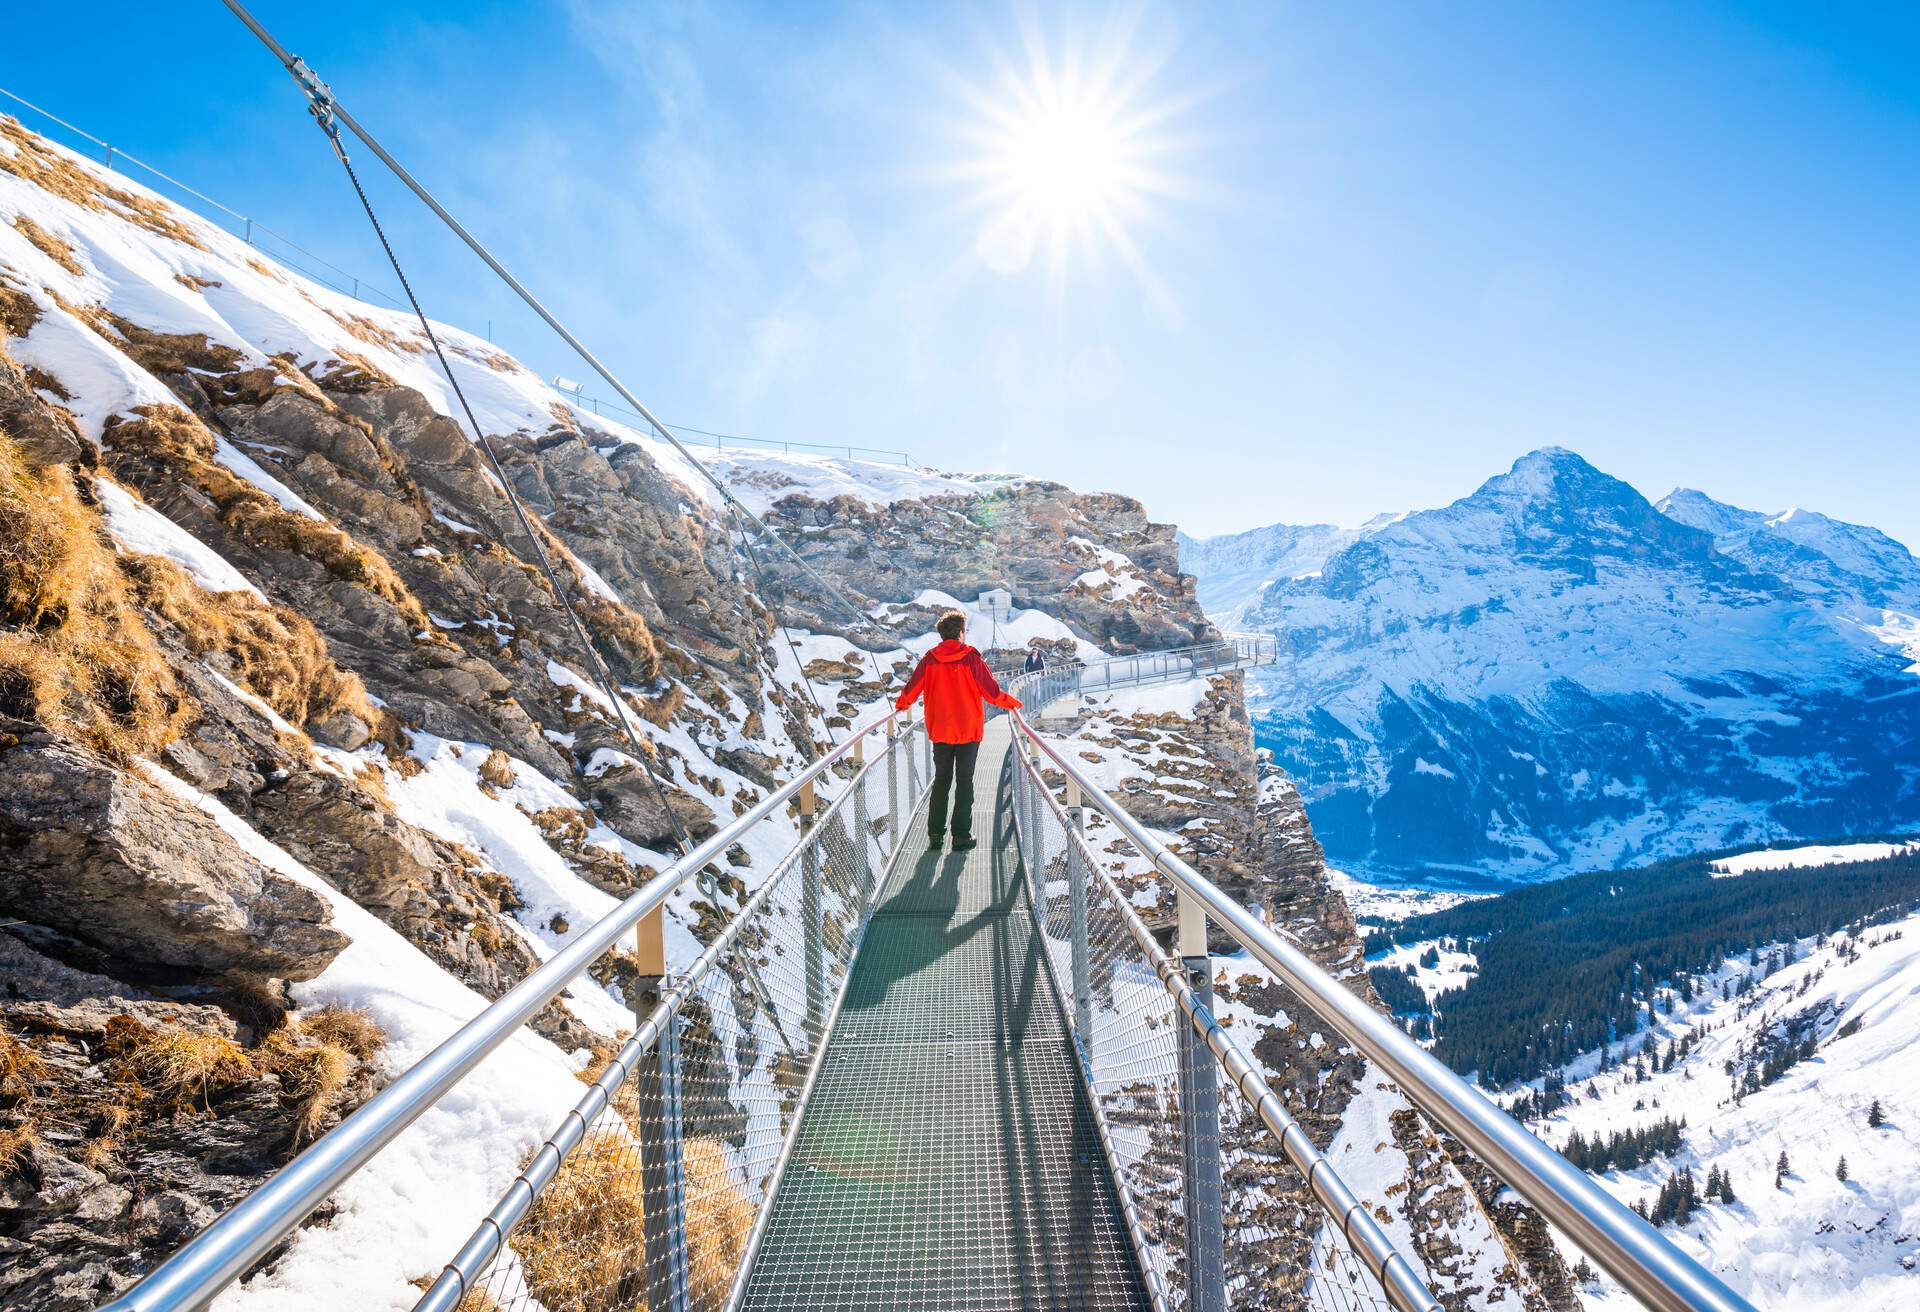 One person walking on a thrilling metal walkway clinging to the cliffside in Grindelwald, Berner Oberland, Switzerland